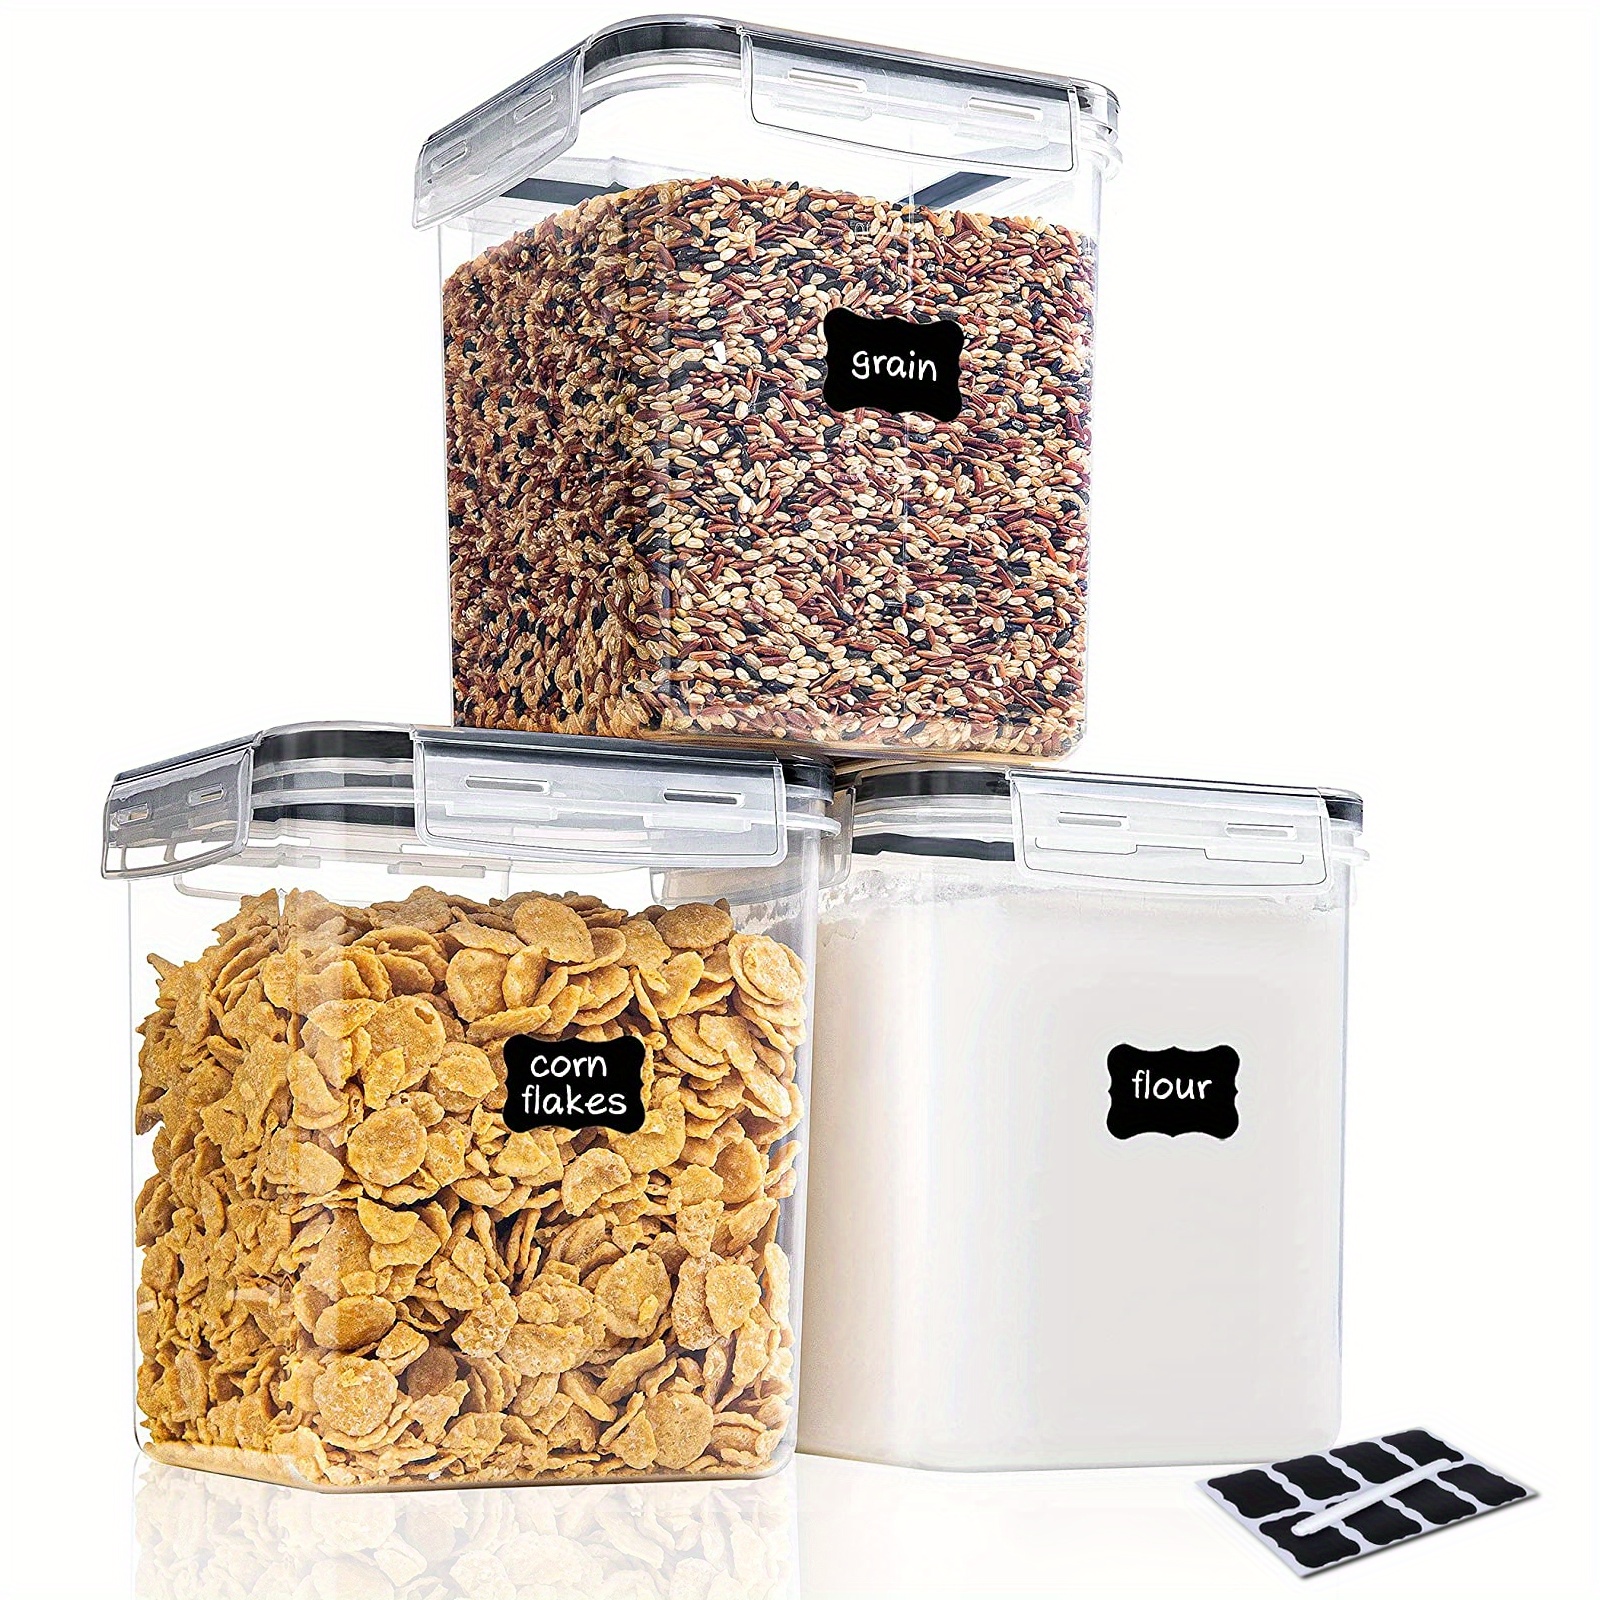 Airtight Food Storage Container Set Food Canisters for Kitchen Pantry  Organization and Storage Ideal for Grains, Flour & Sugar